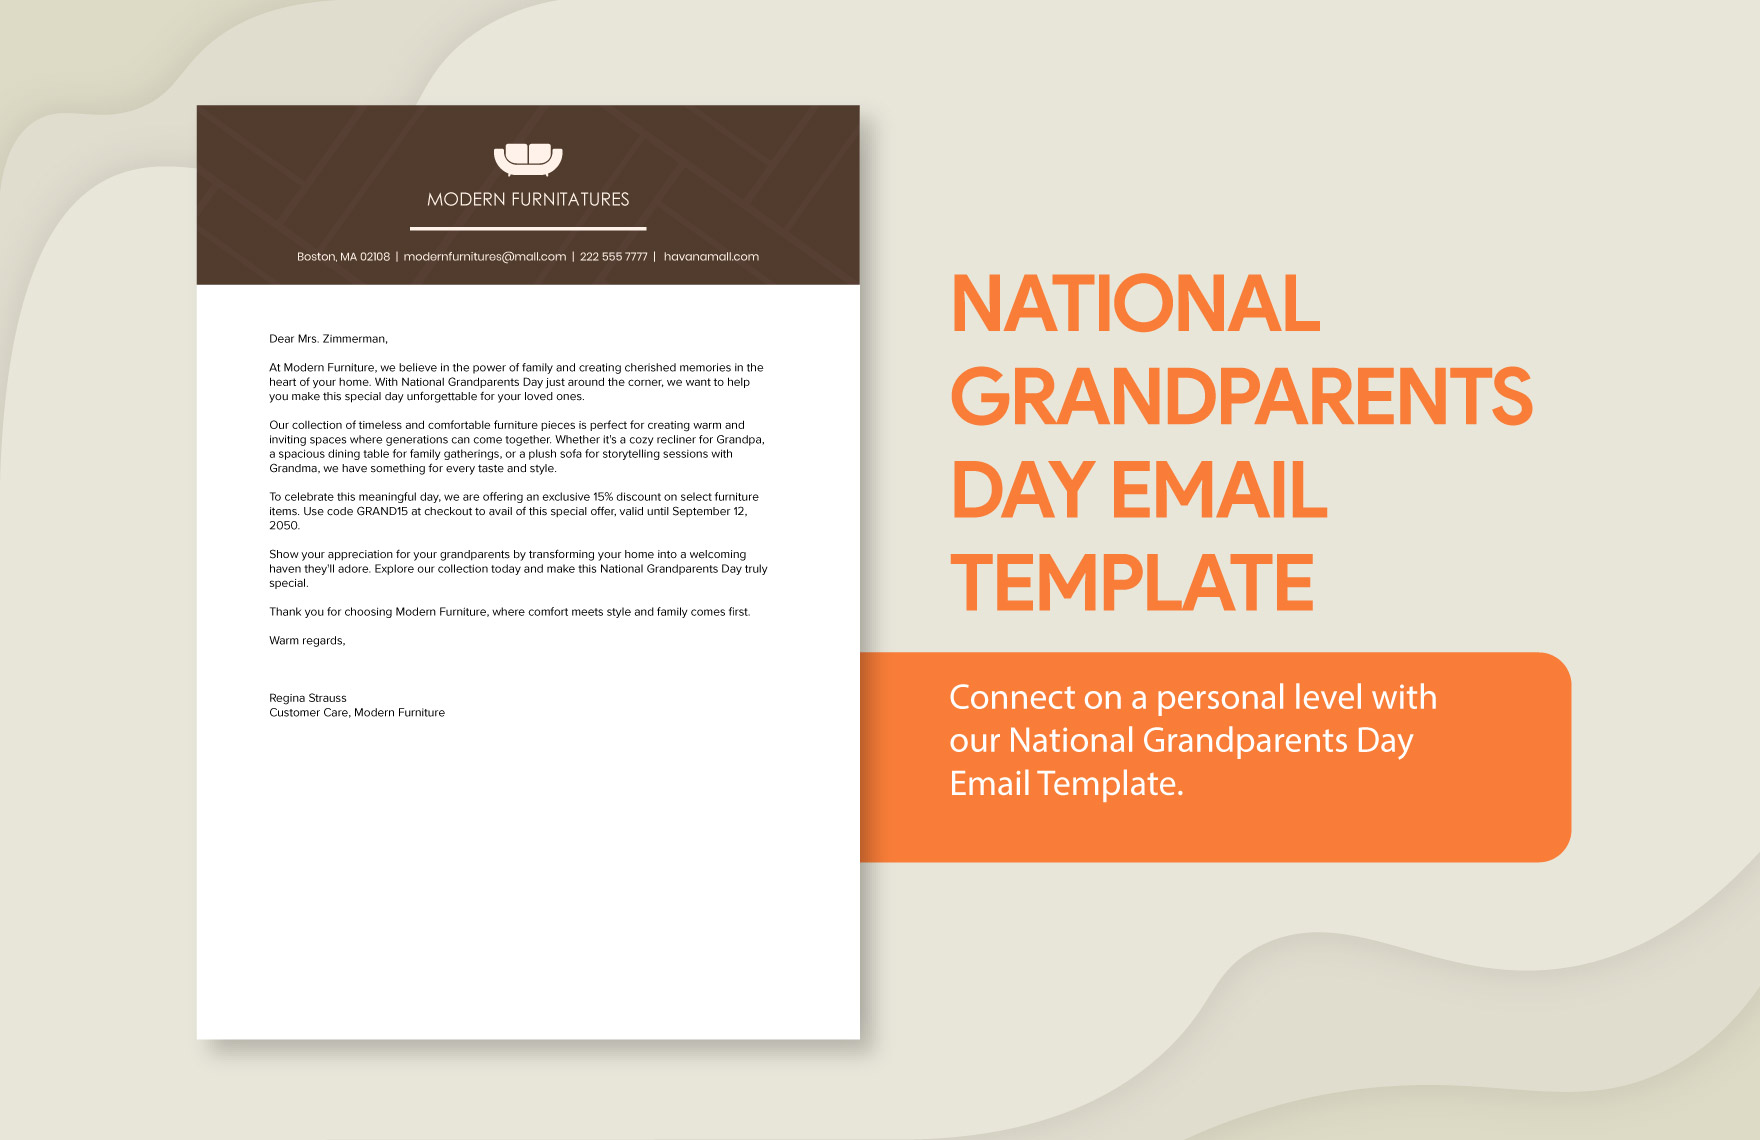 National Grandparents Day Email Template